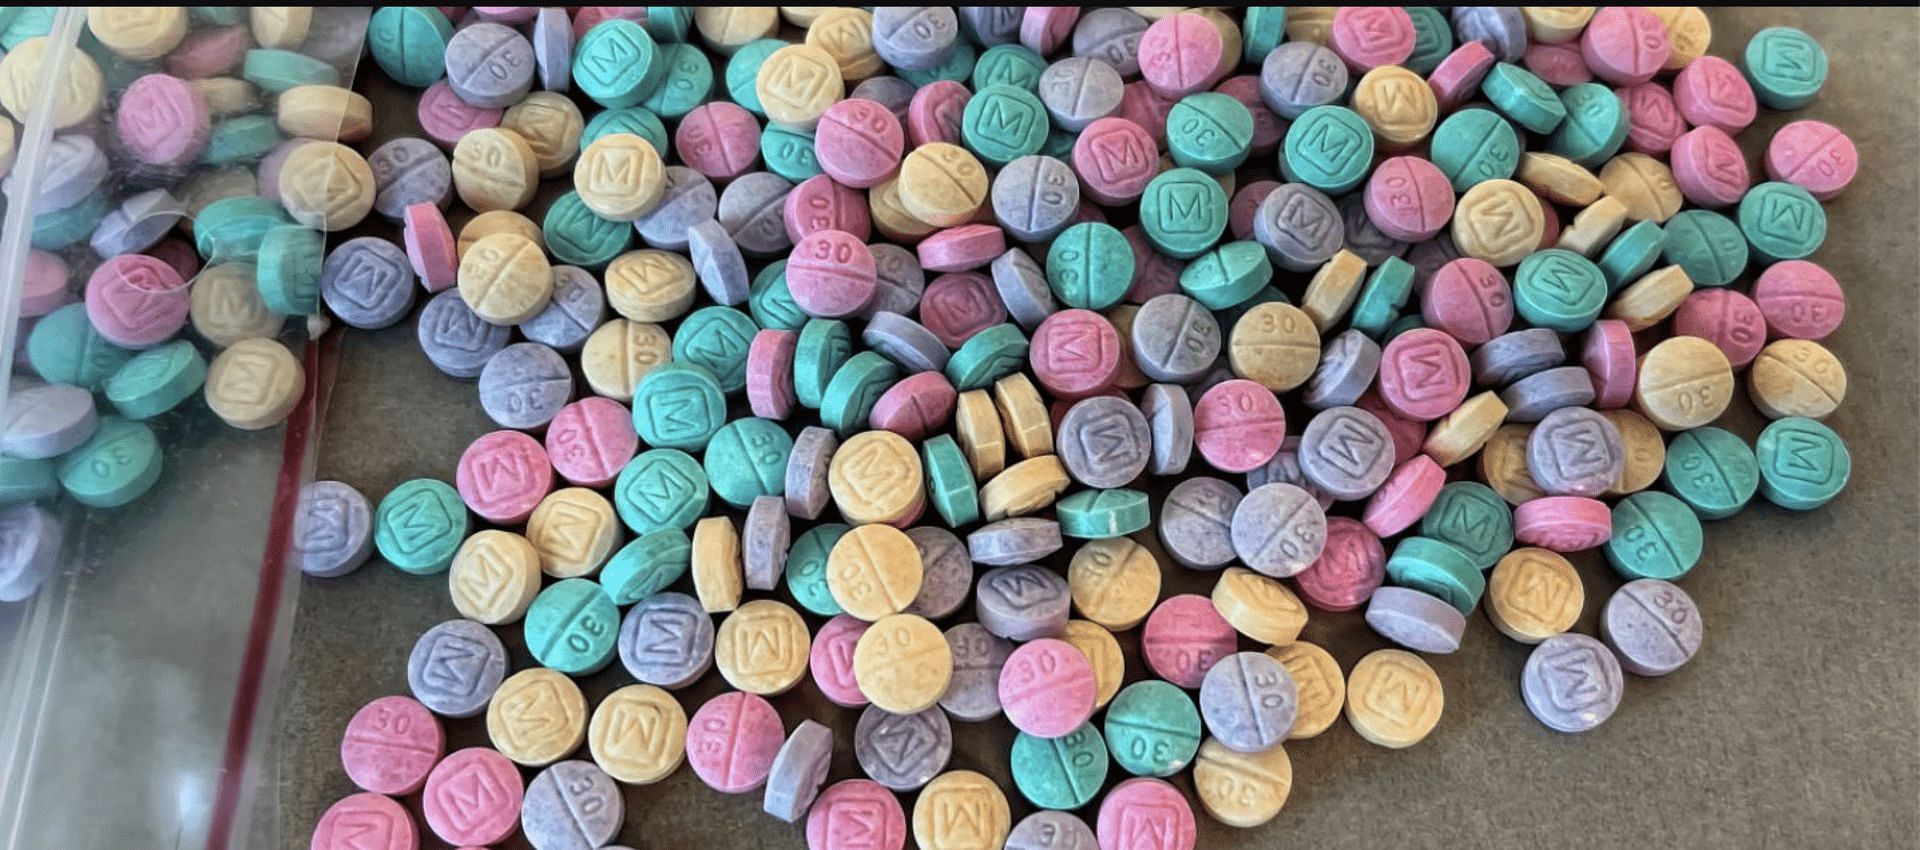 Is the Fentanyl Halloween Candy myth true? Expects doubt the claims made by reports and organisations. (Image via DEA)